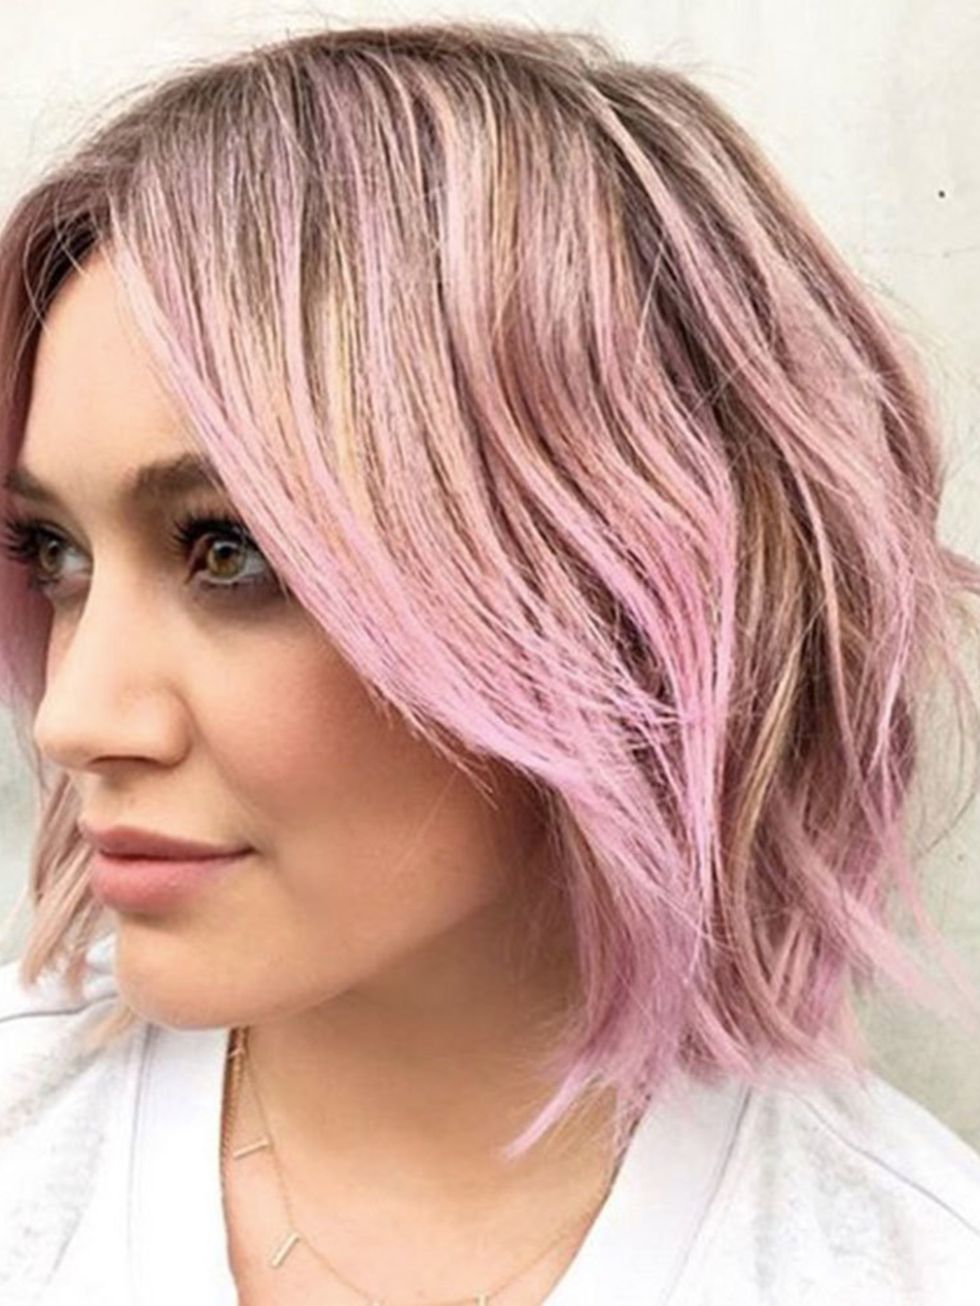 After cutting her hair into a bob in December, Hilary has now opted for candy floss pink to kick off 2016.